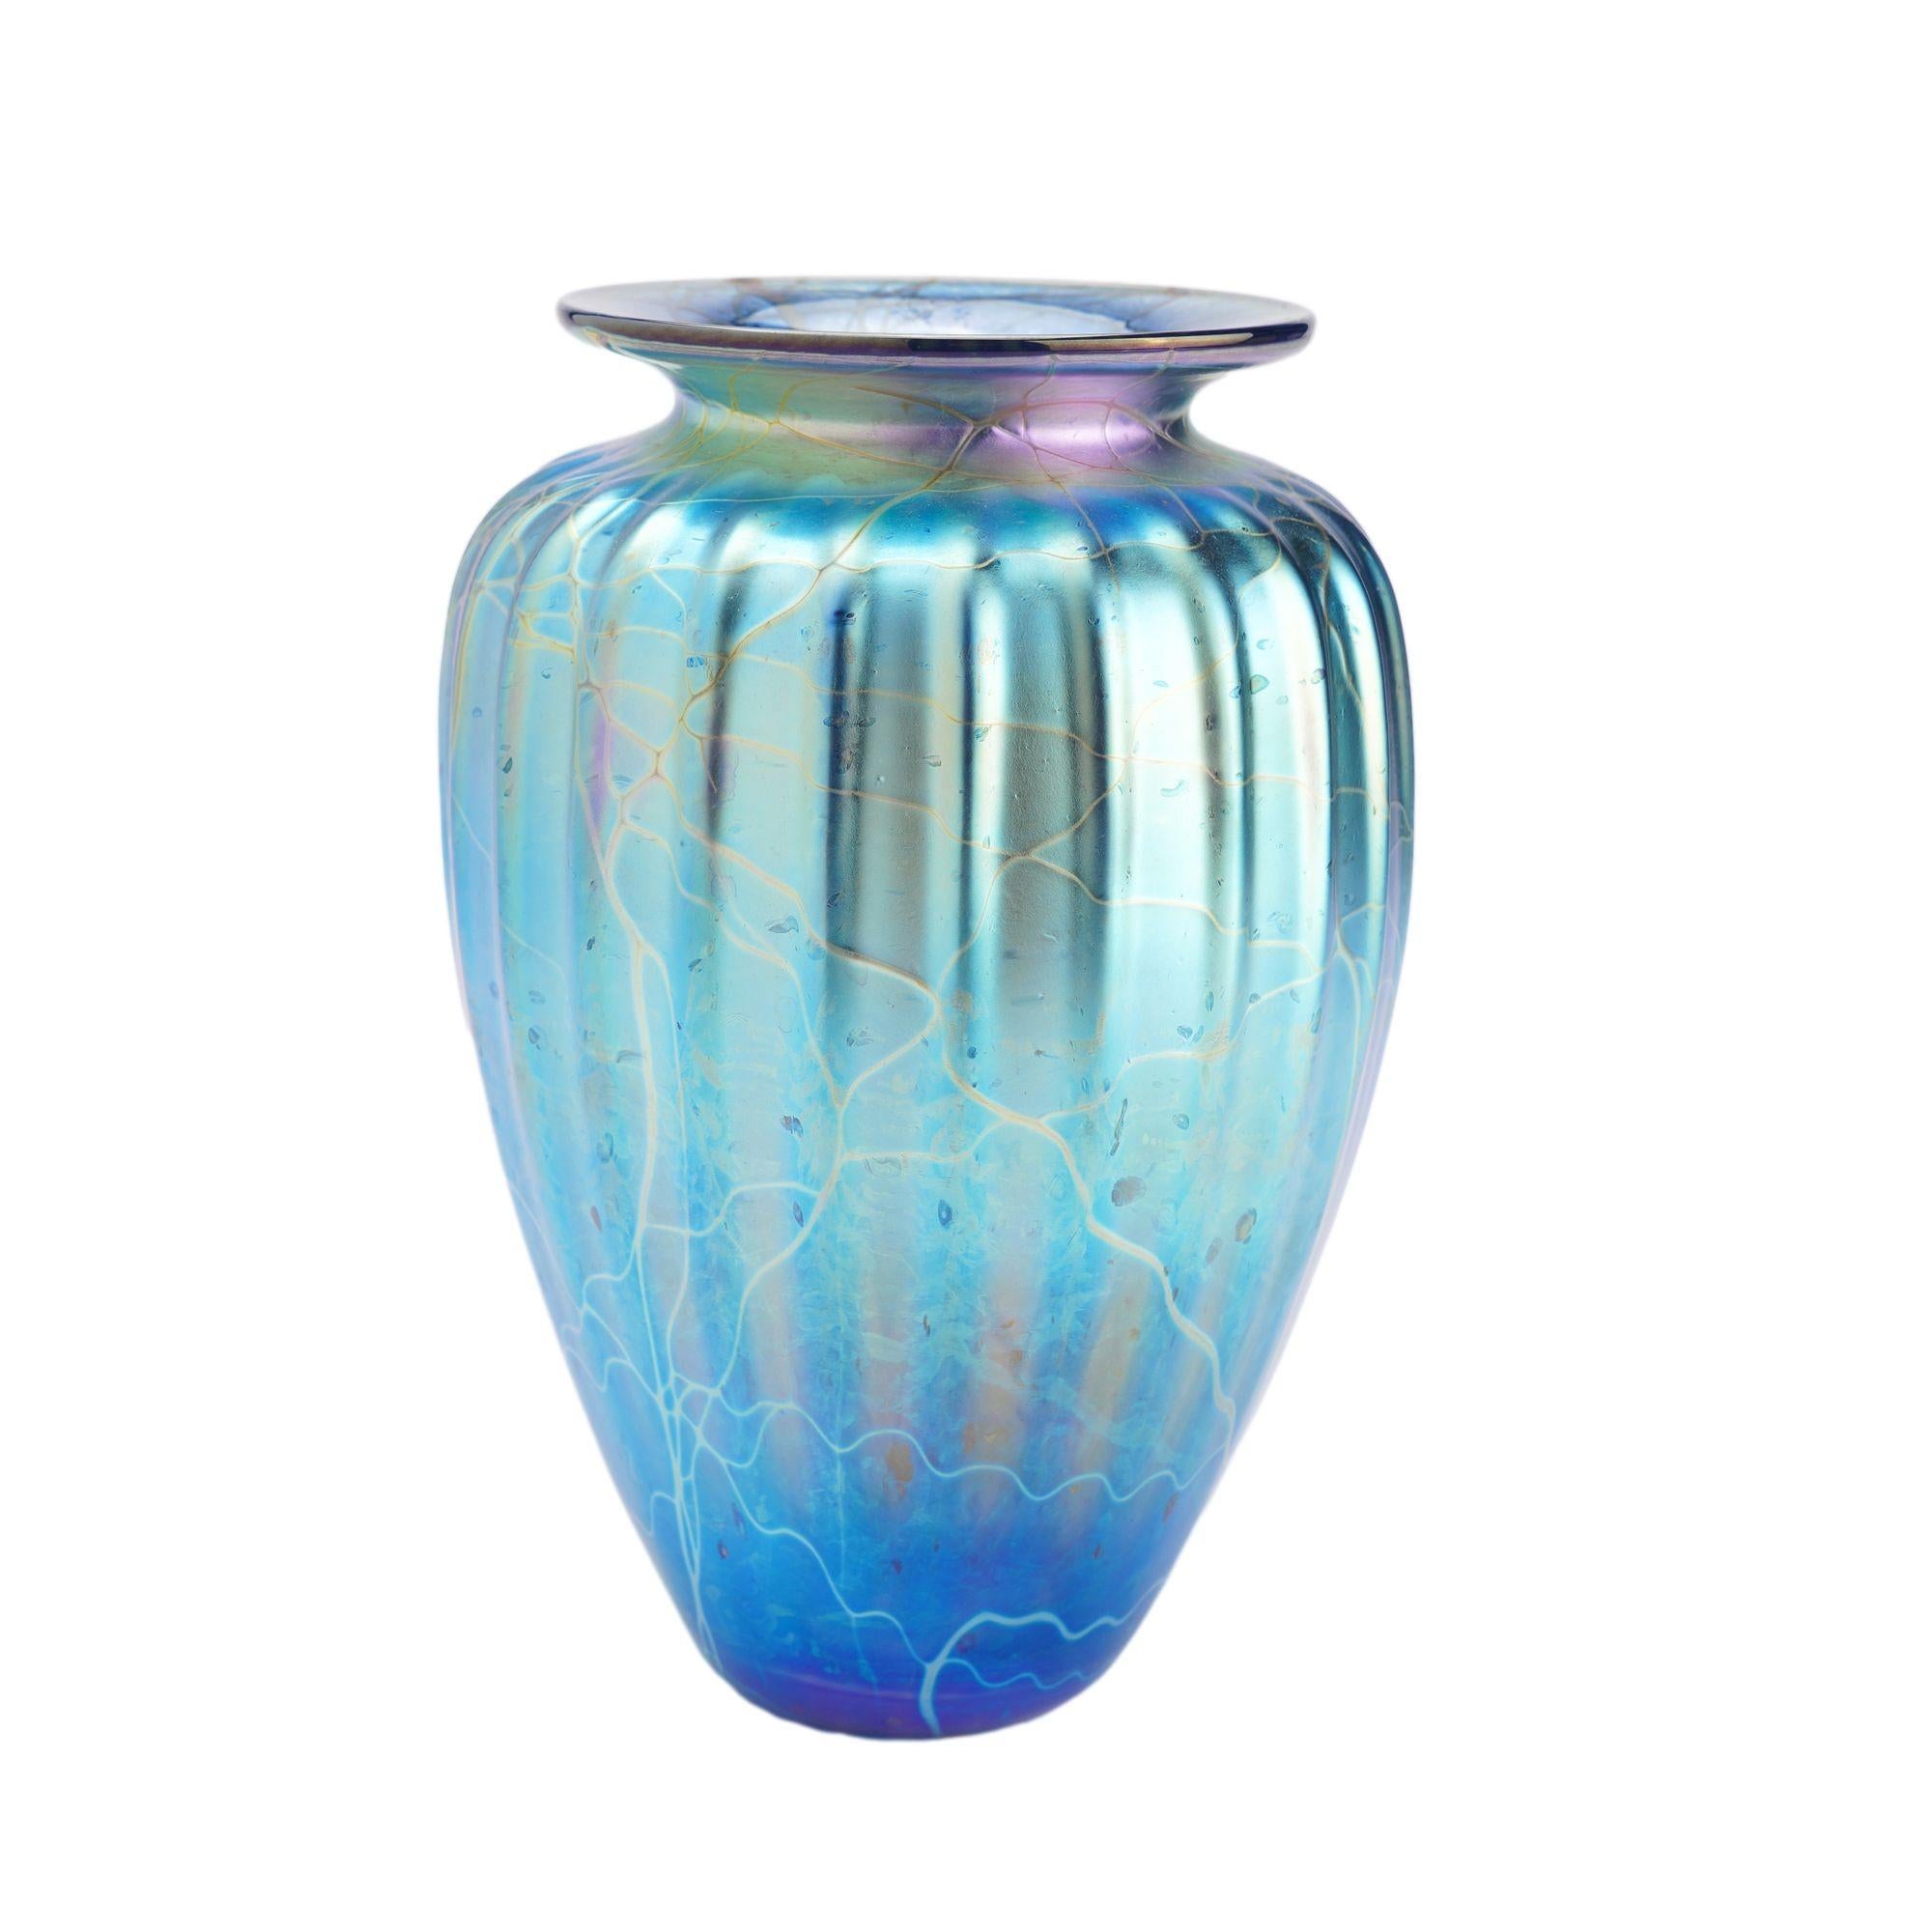 Iridescent blue blown glass vase by Mayauel Ward, 2015 In Excellent Condition For Sale In Kenilworth, IL